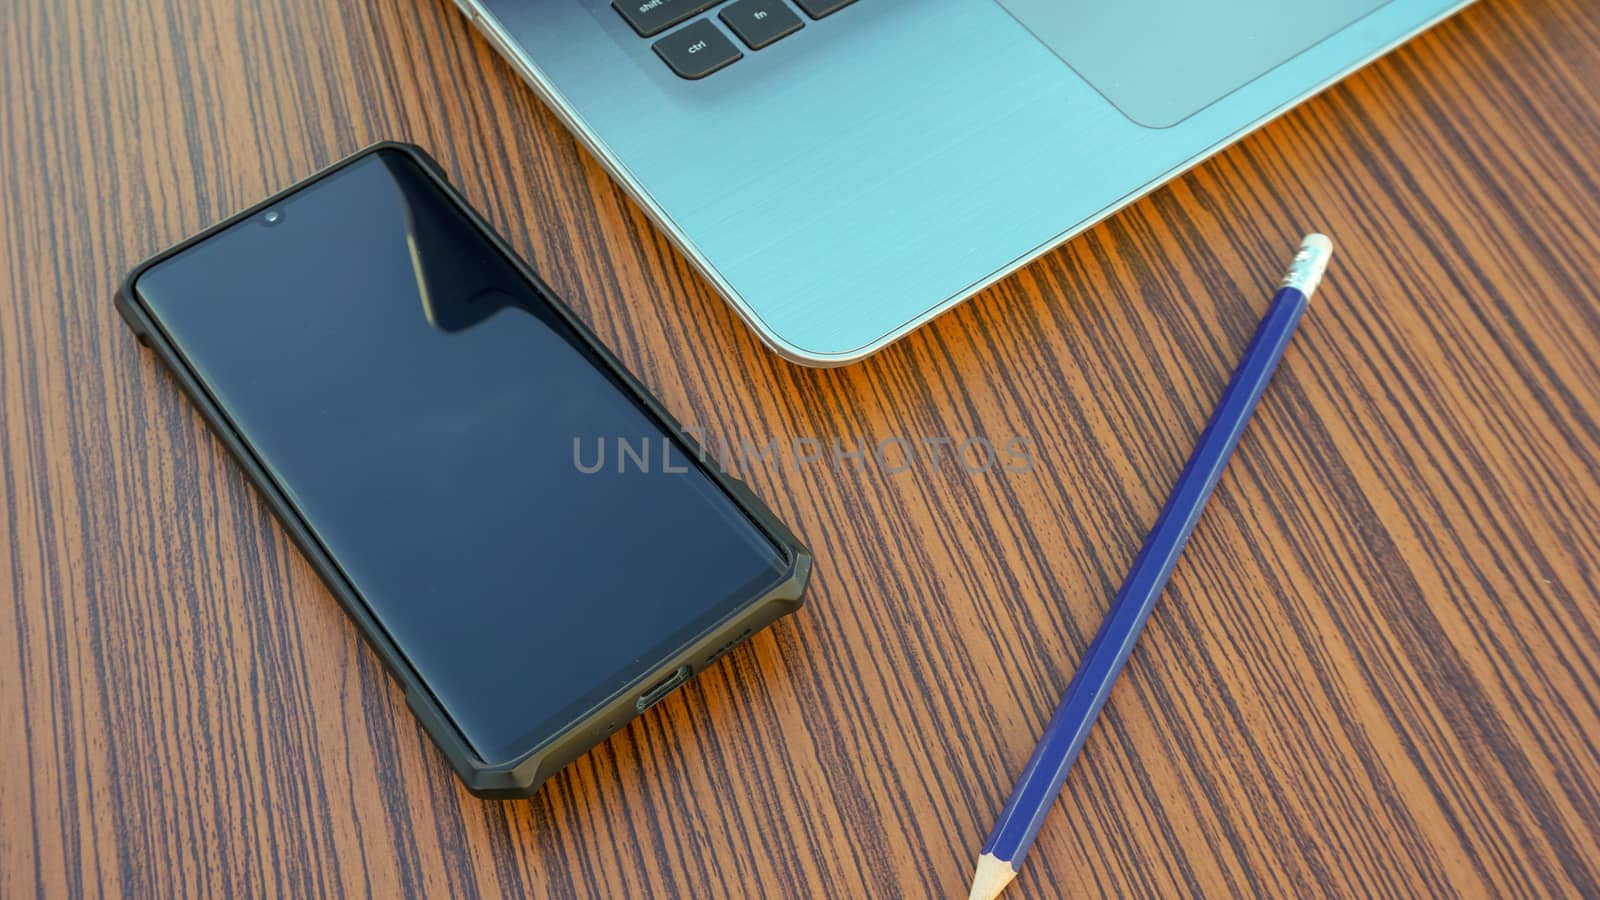 Computer notebook with black smartphone and a blue pencil on a wooden desk. by sonandonures